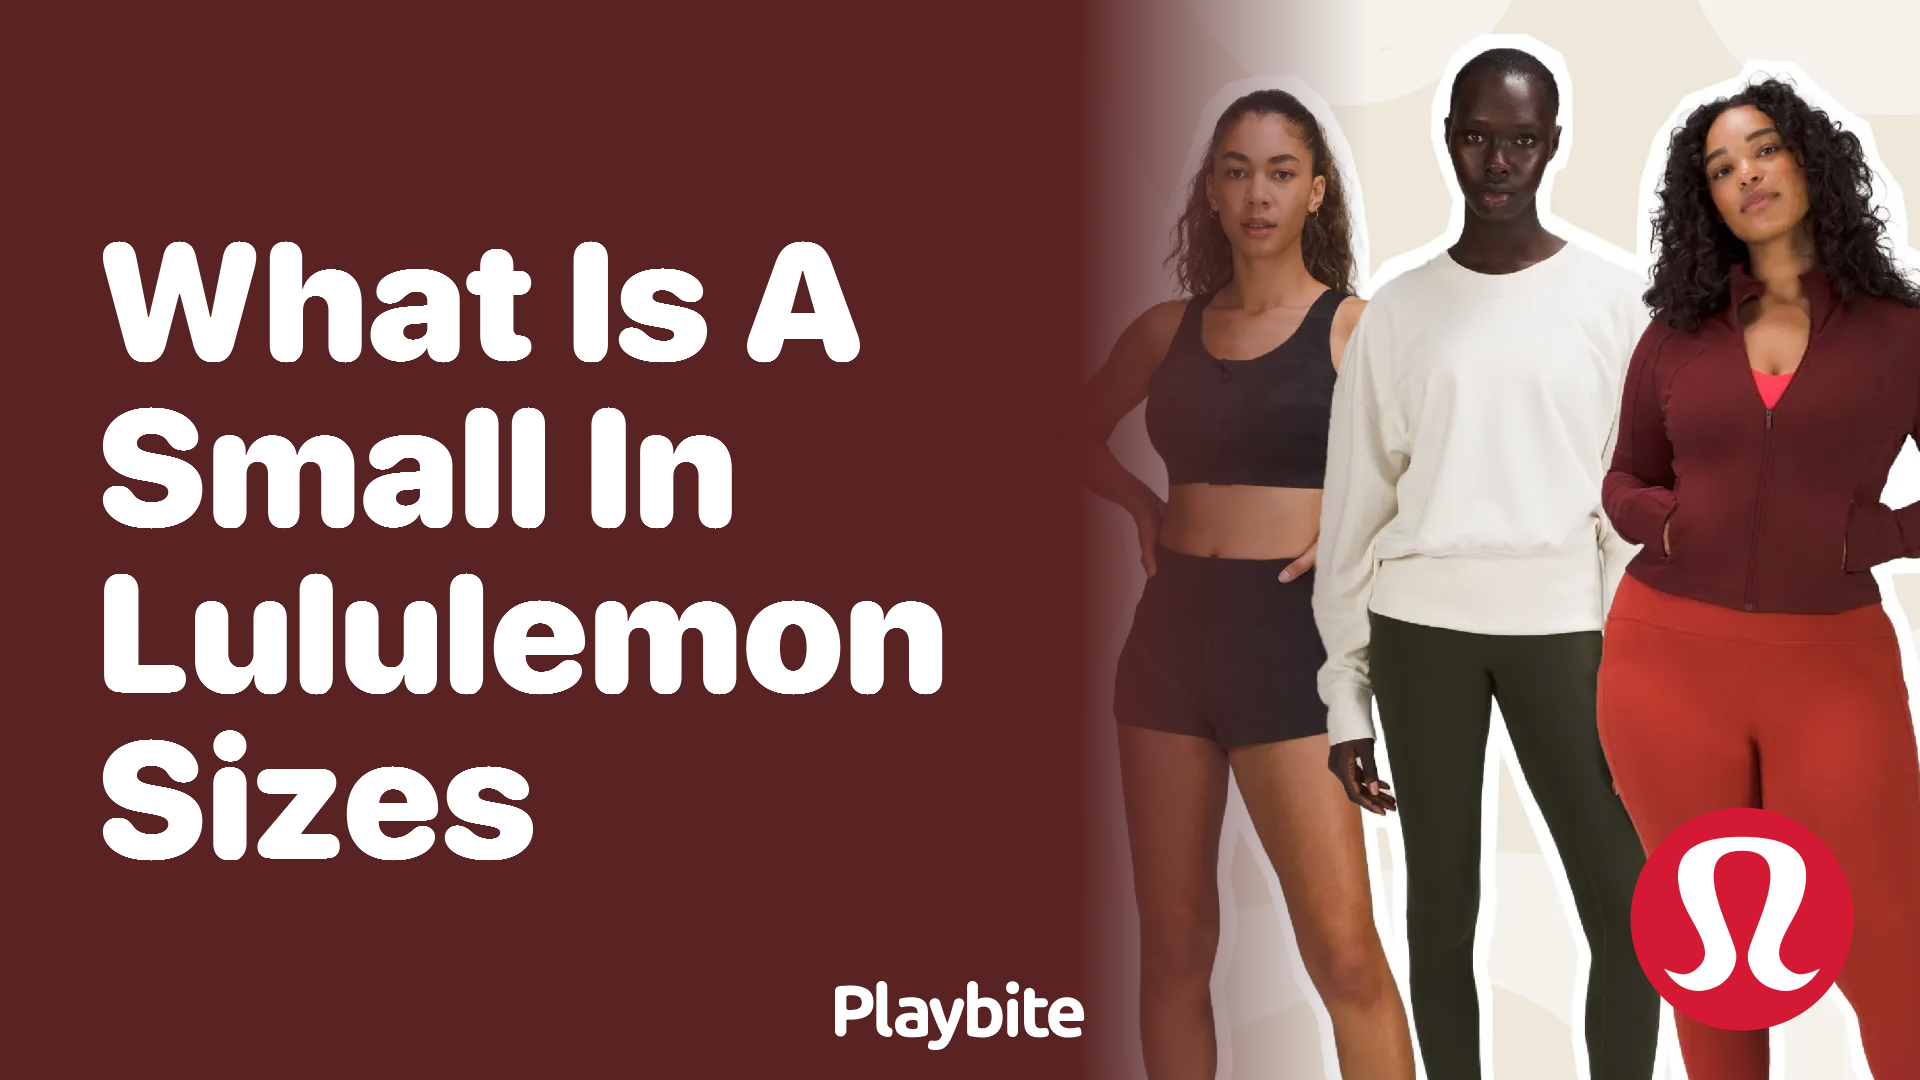 What Does a Small in Lululemon Sizes Mean? - Playbite